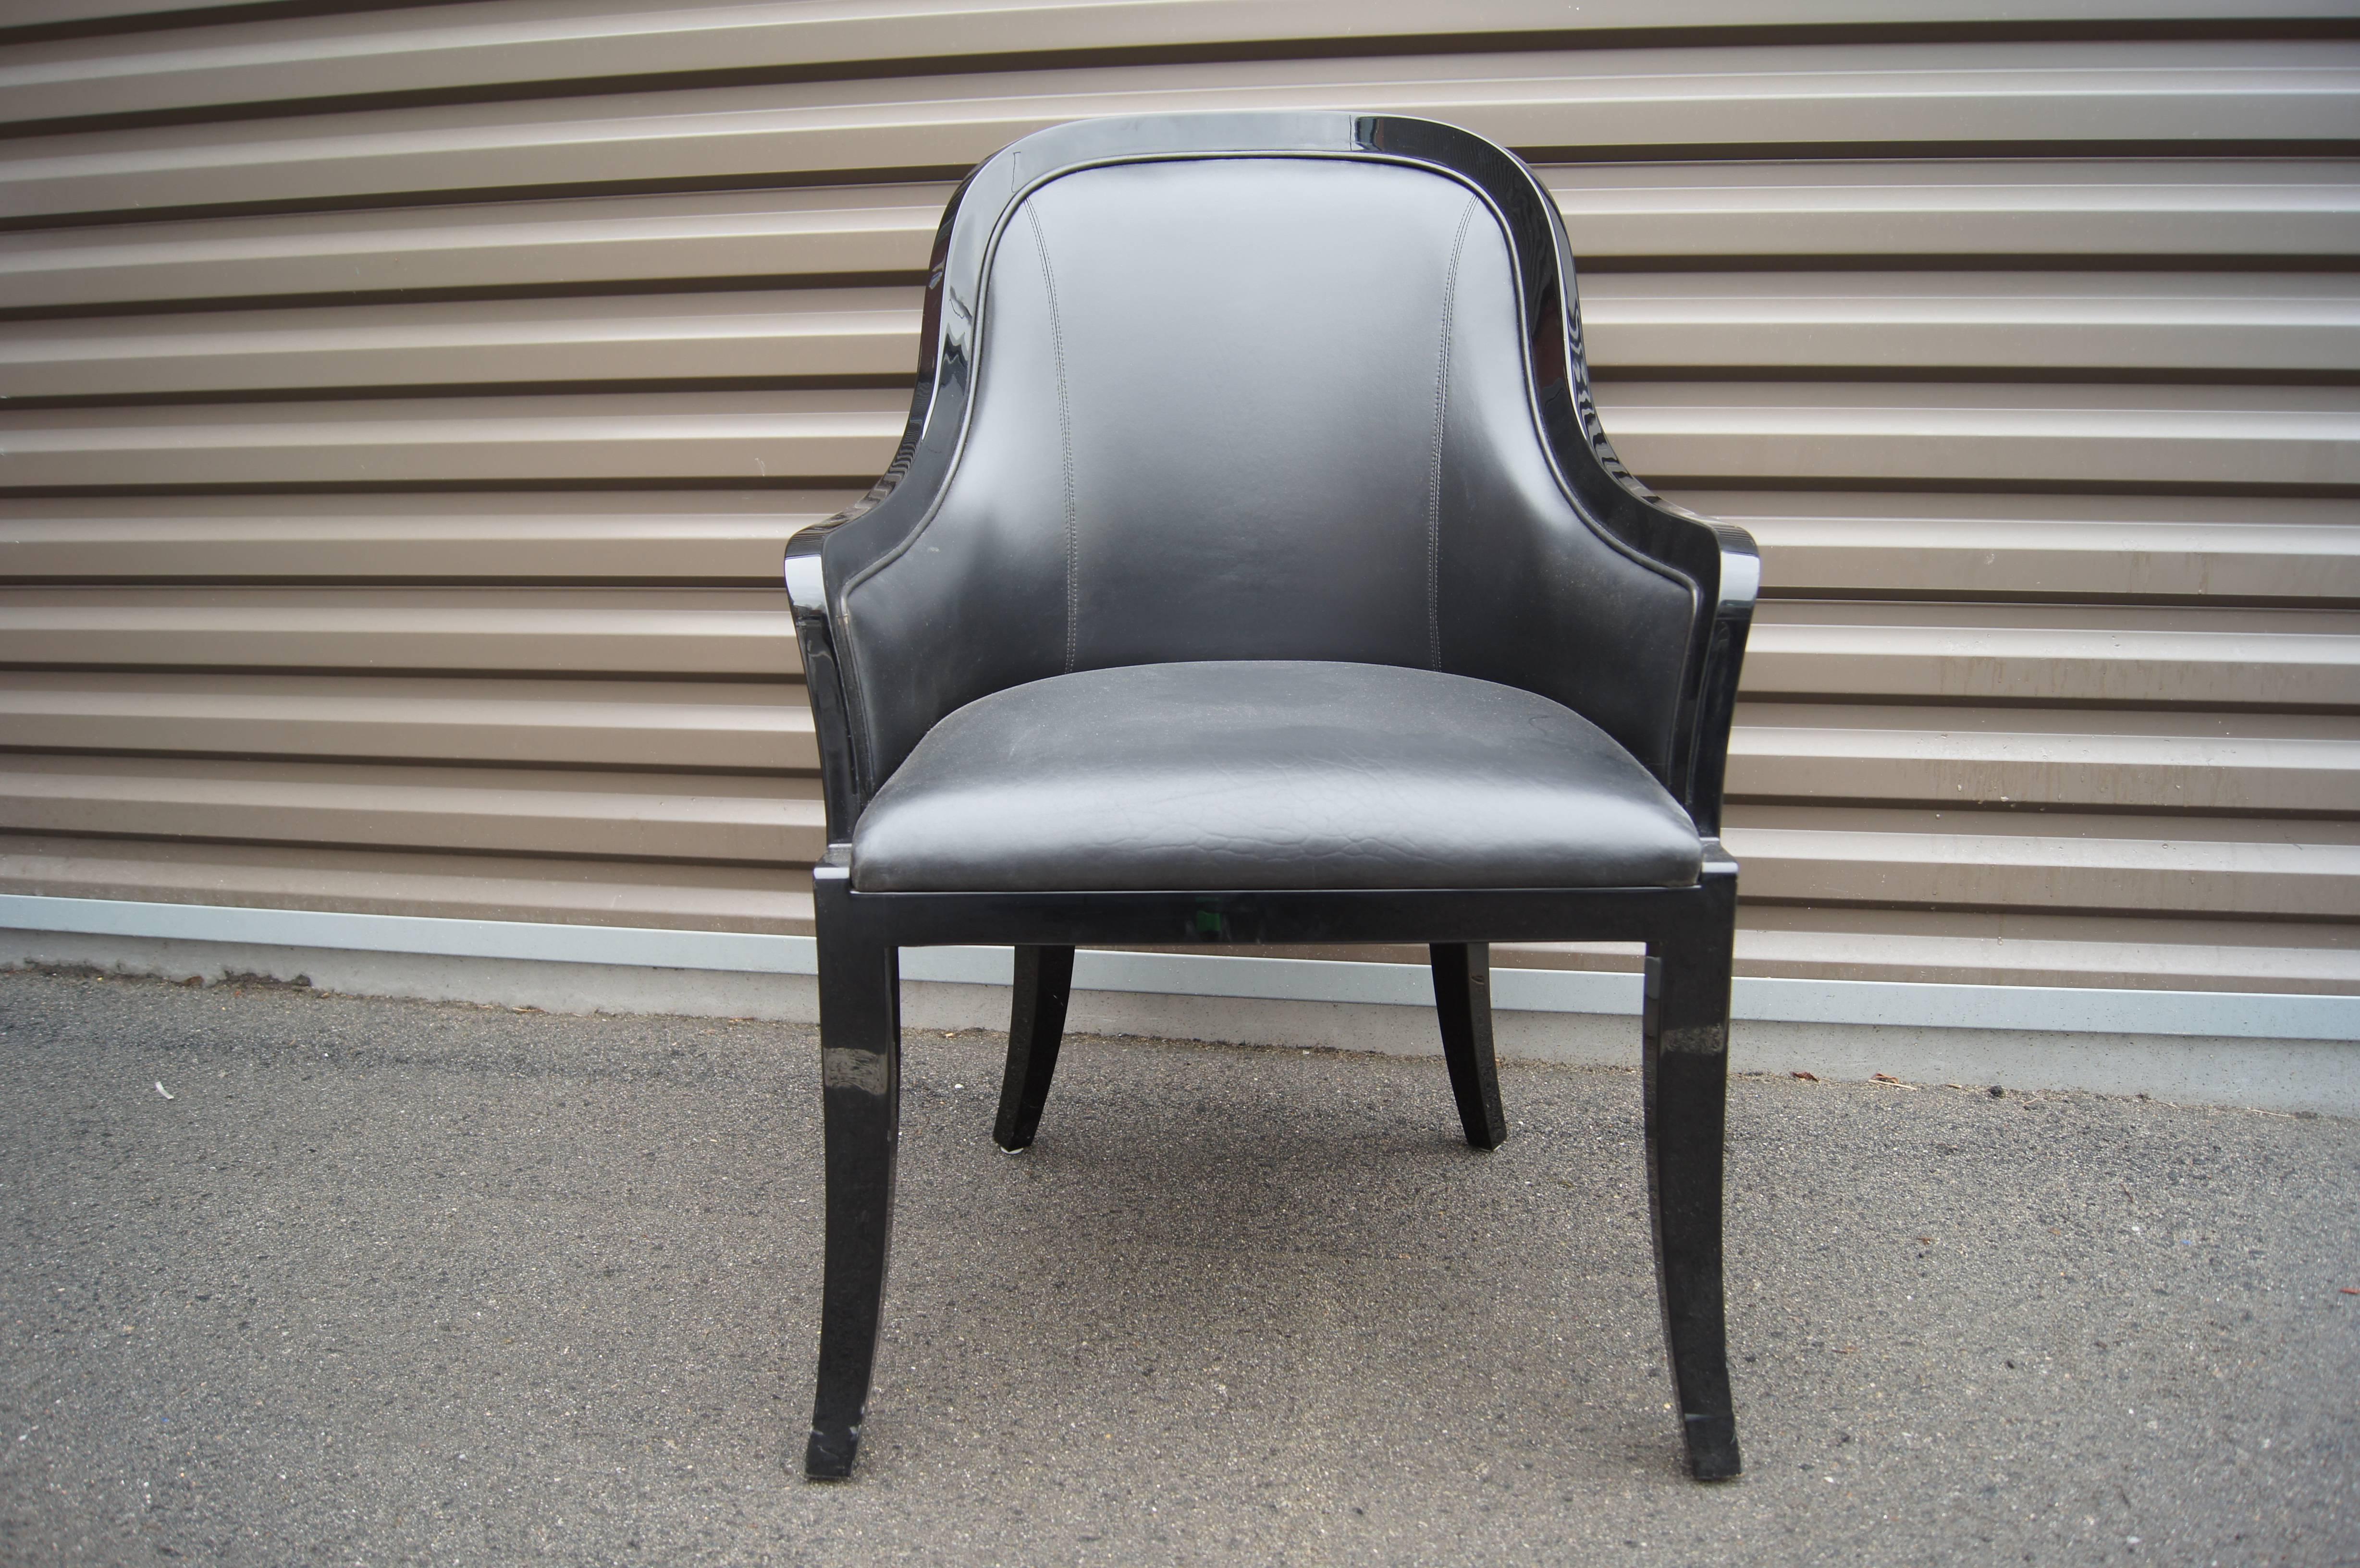 American Black Lacquer and Leather Regina Armchair by Karl Springer